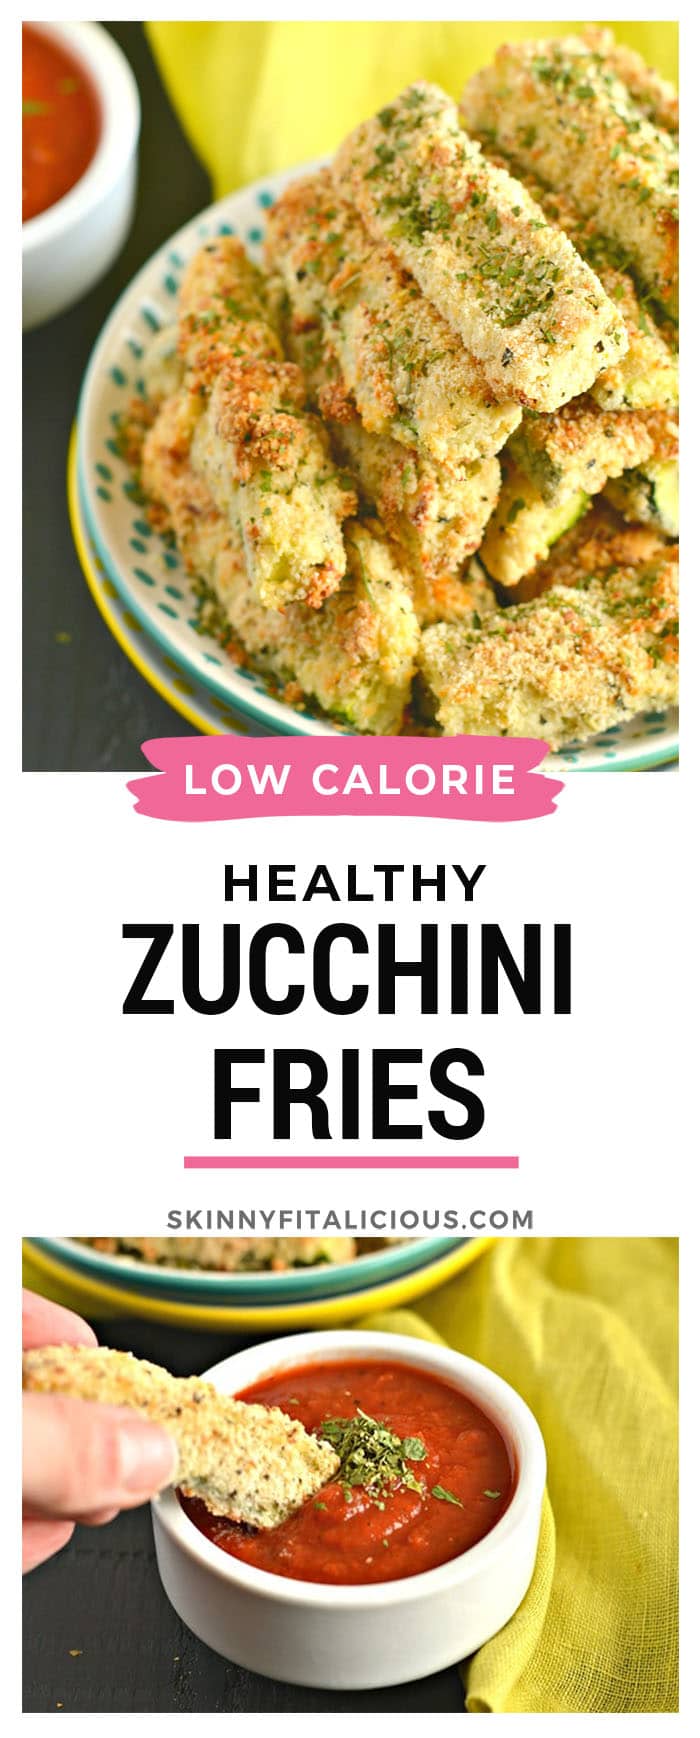 A super easy recipe for Baked Zucchini Parmesan Fries. Made with almond and coconut flour, this is a flavorful appetizer or side dish everyone will love! Gluten Free + Low Calorie with Paleo option